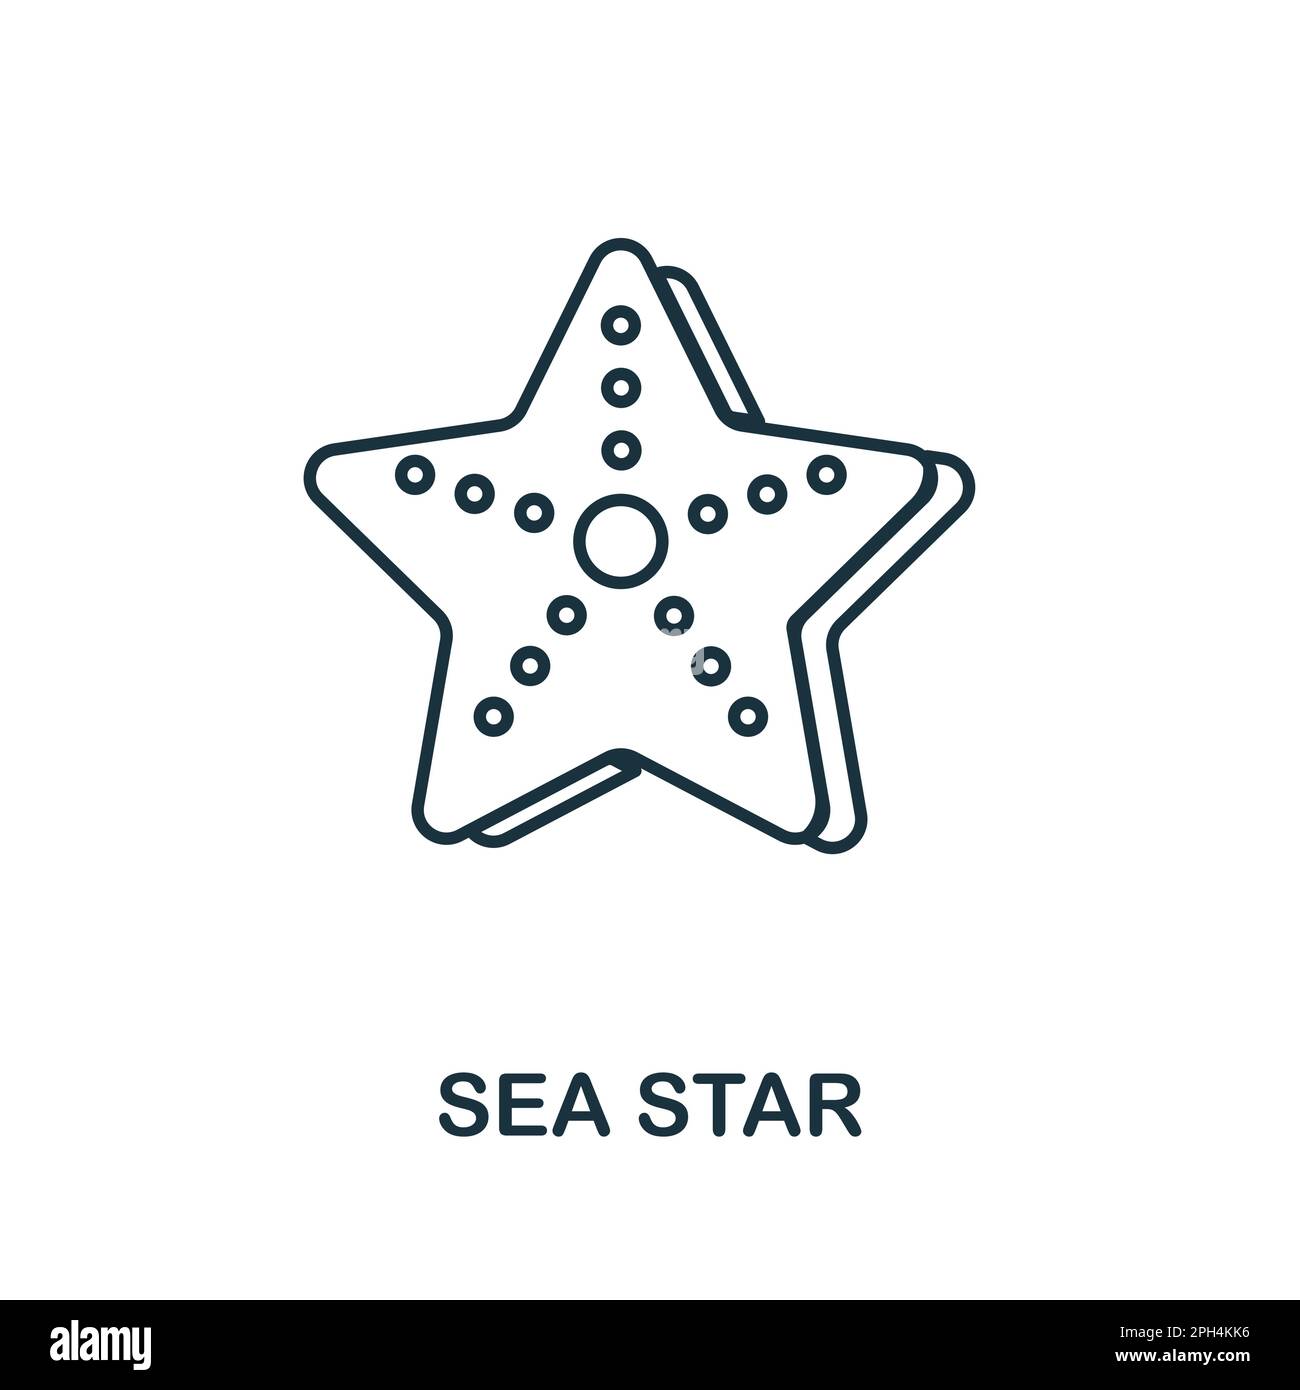 Sea Star line icon. Monochrome simple Sea Star outline icon for templates, web design and infographics Stock Vector